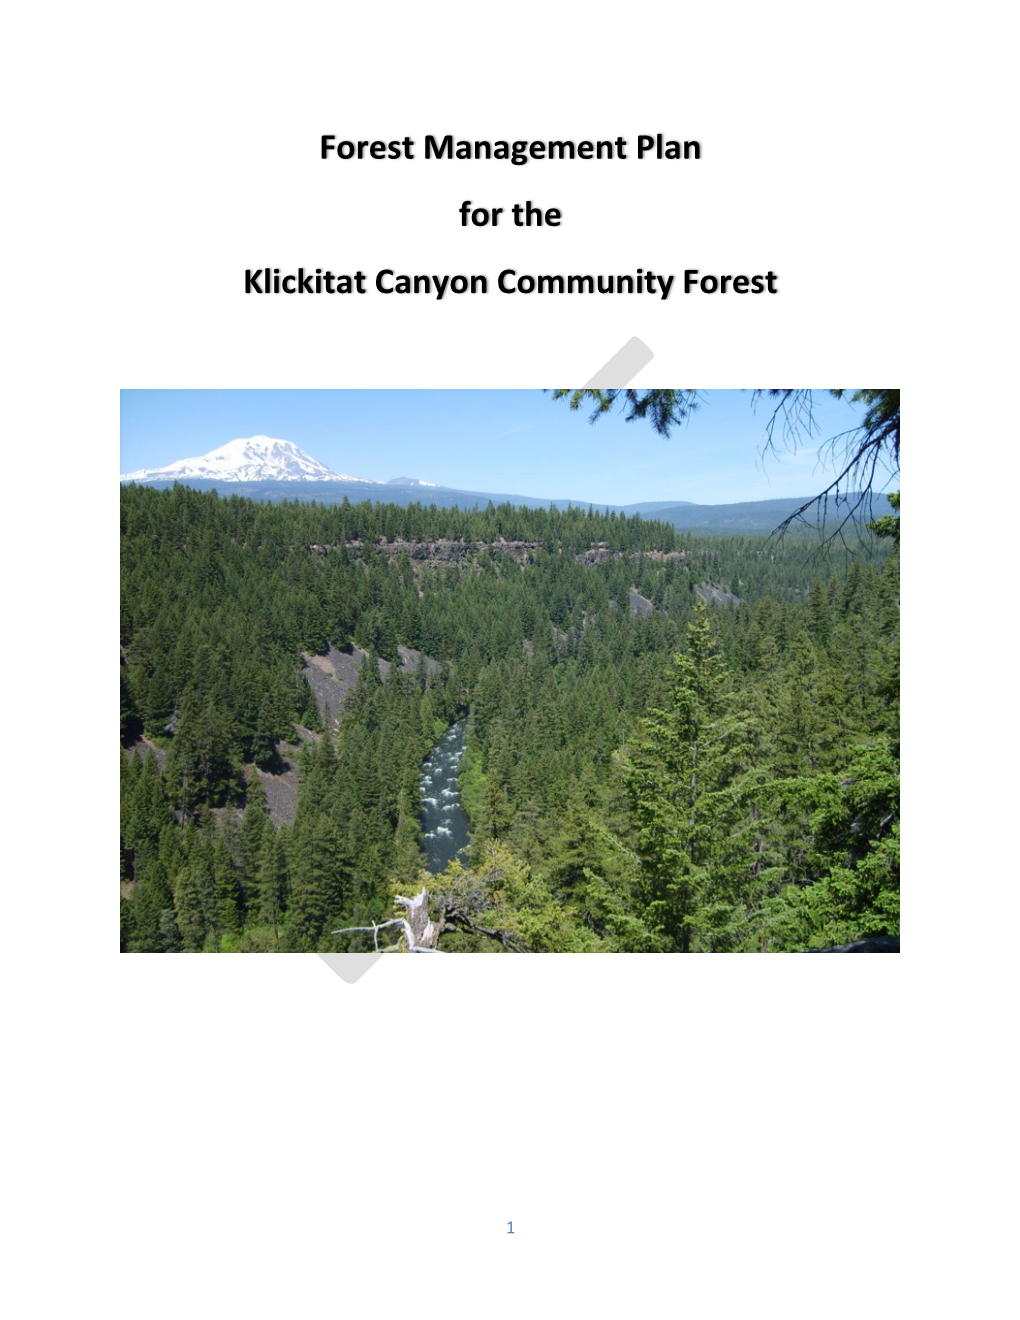 Forest Management Plan for the Klickitat Canyon Community Forest